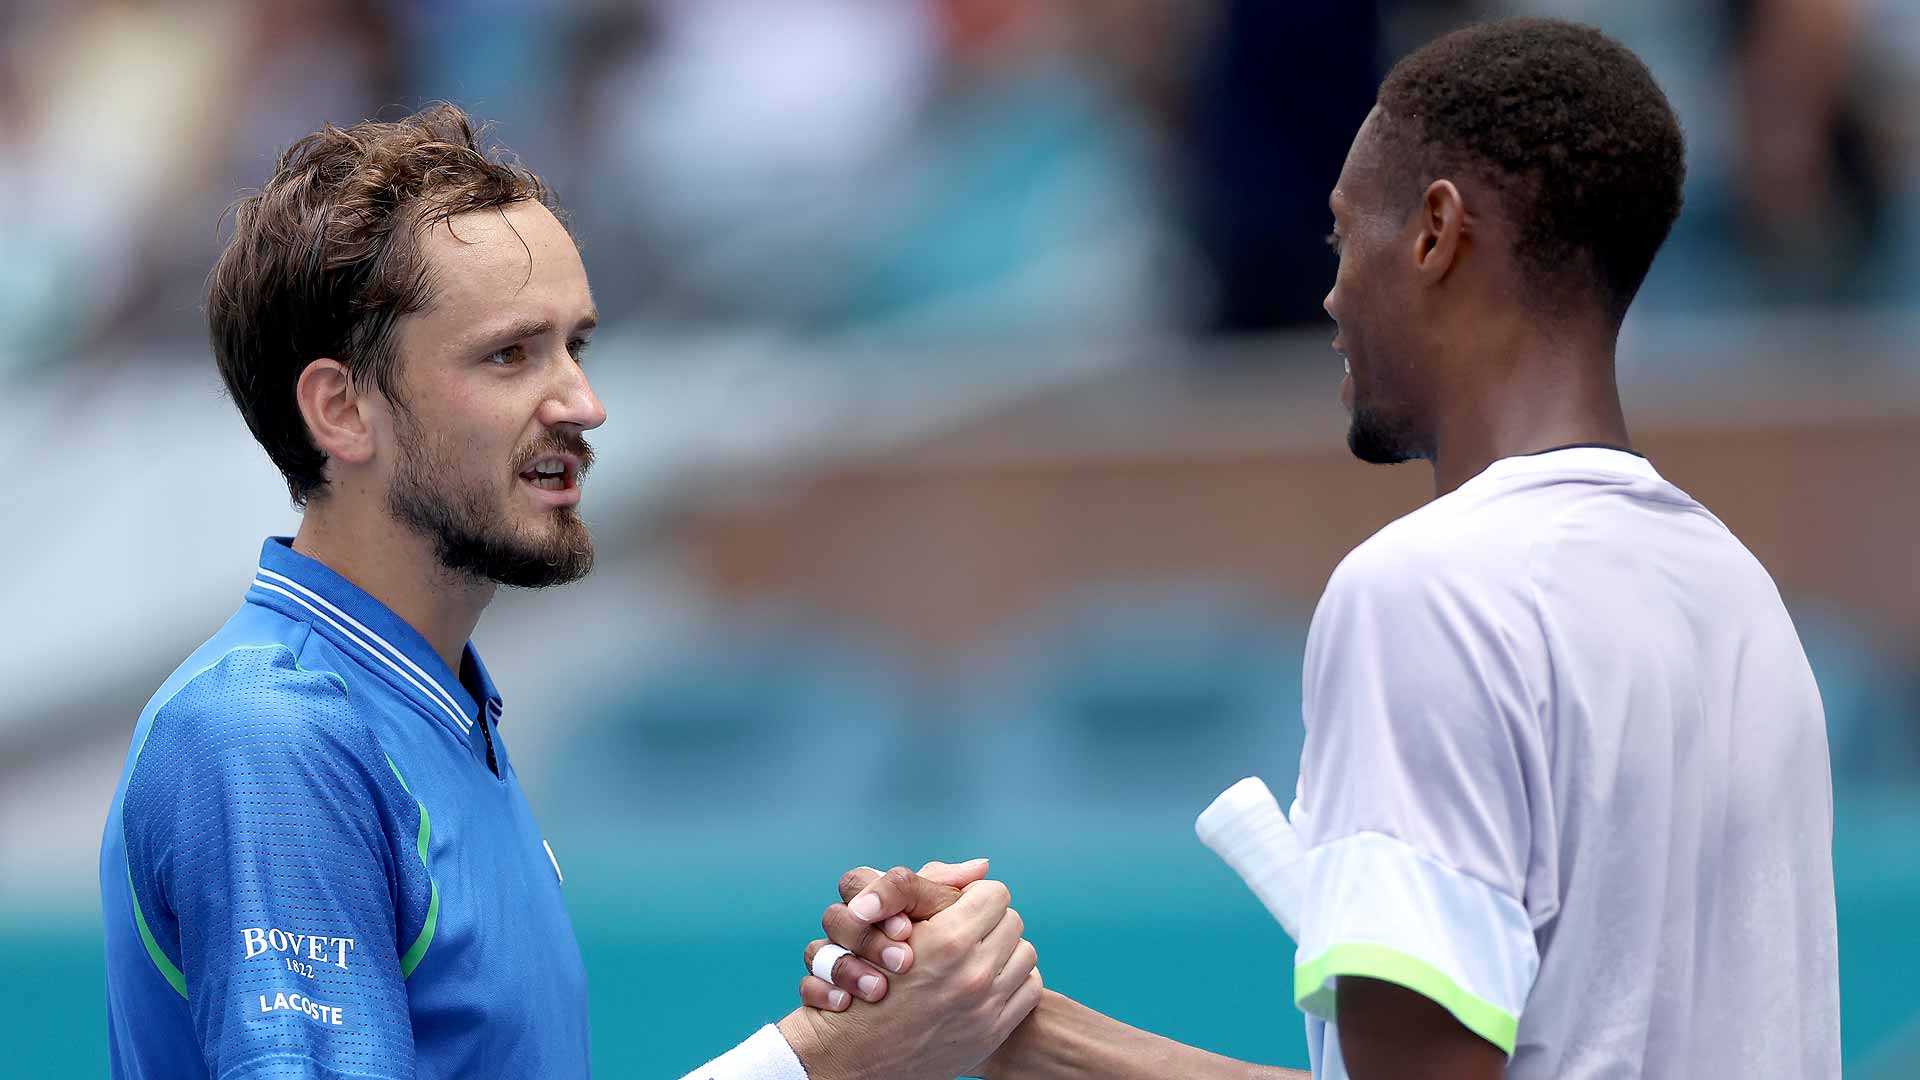 Daniil Medvedev and Christopher Eubanks shake hands after their quarter-final clash in Miami in March.